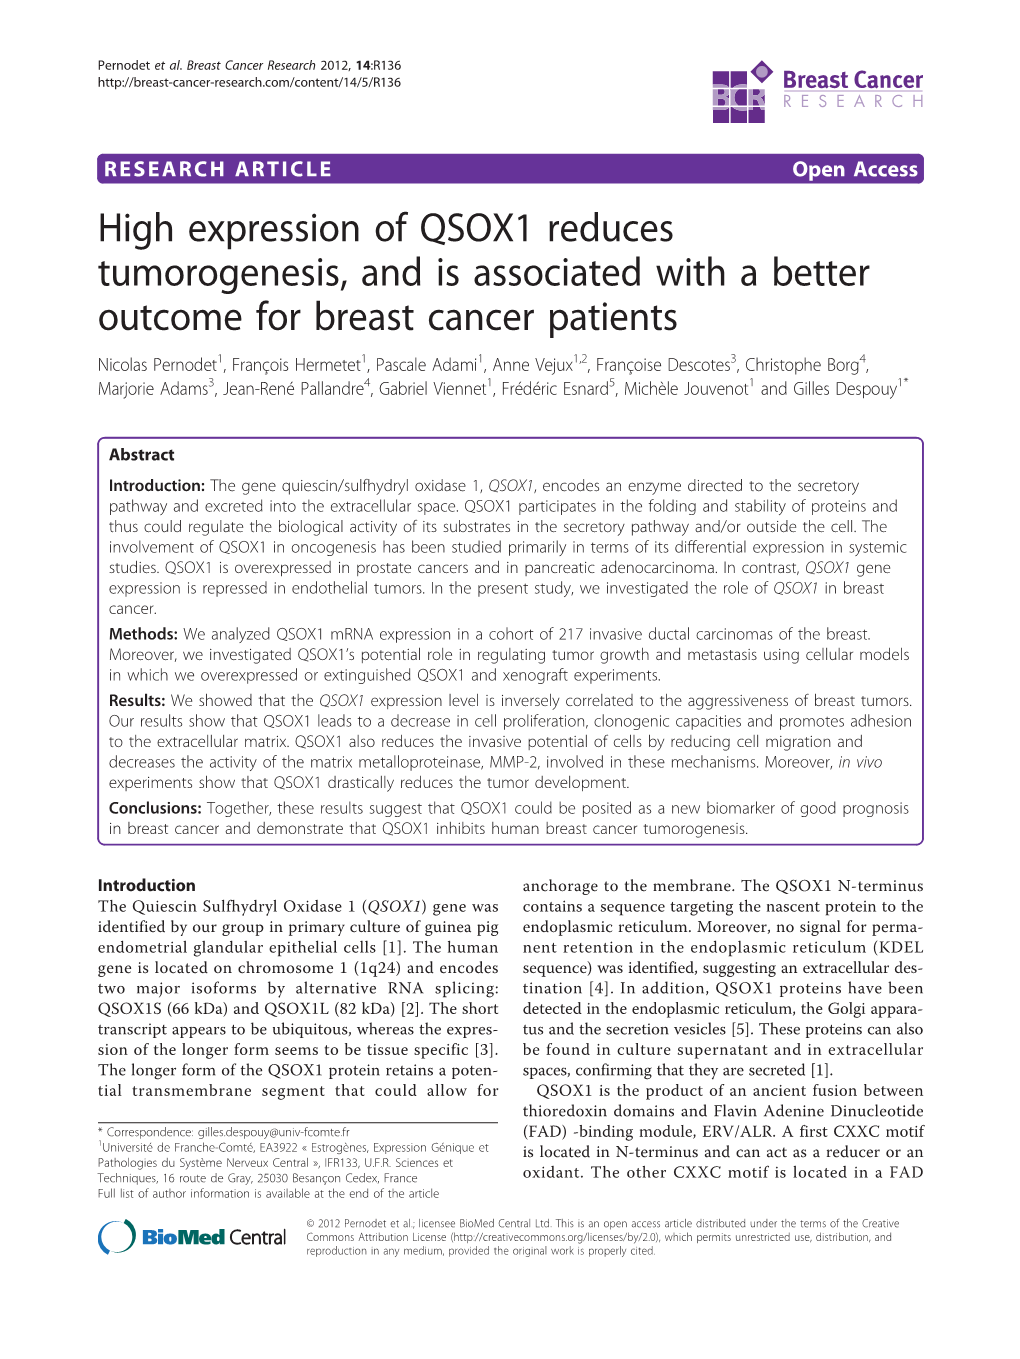 High Expression of QSOX1 Reduces Tumorogenesis, and Is Associated